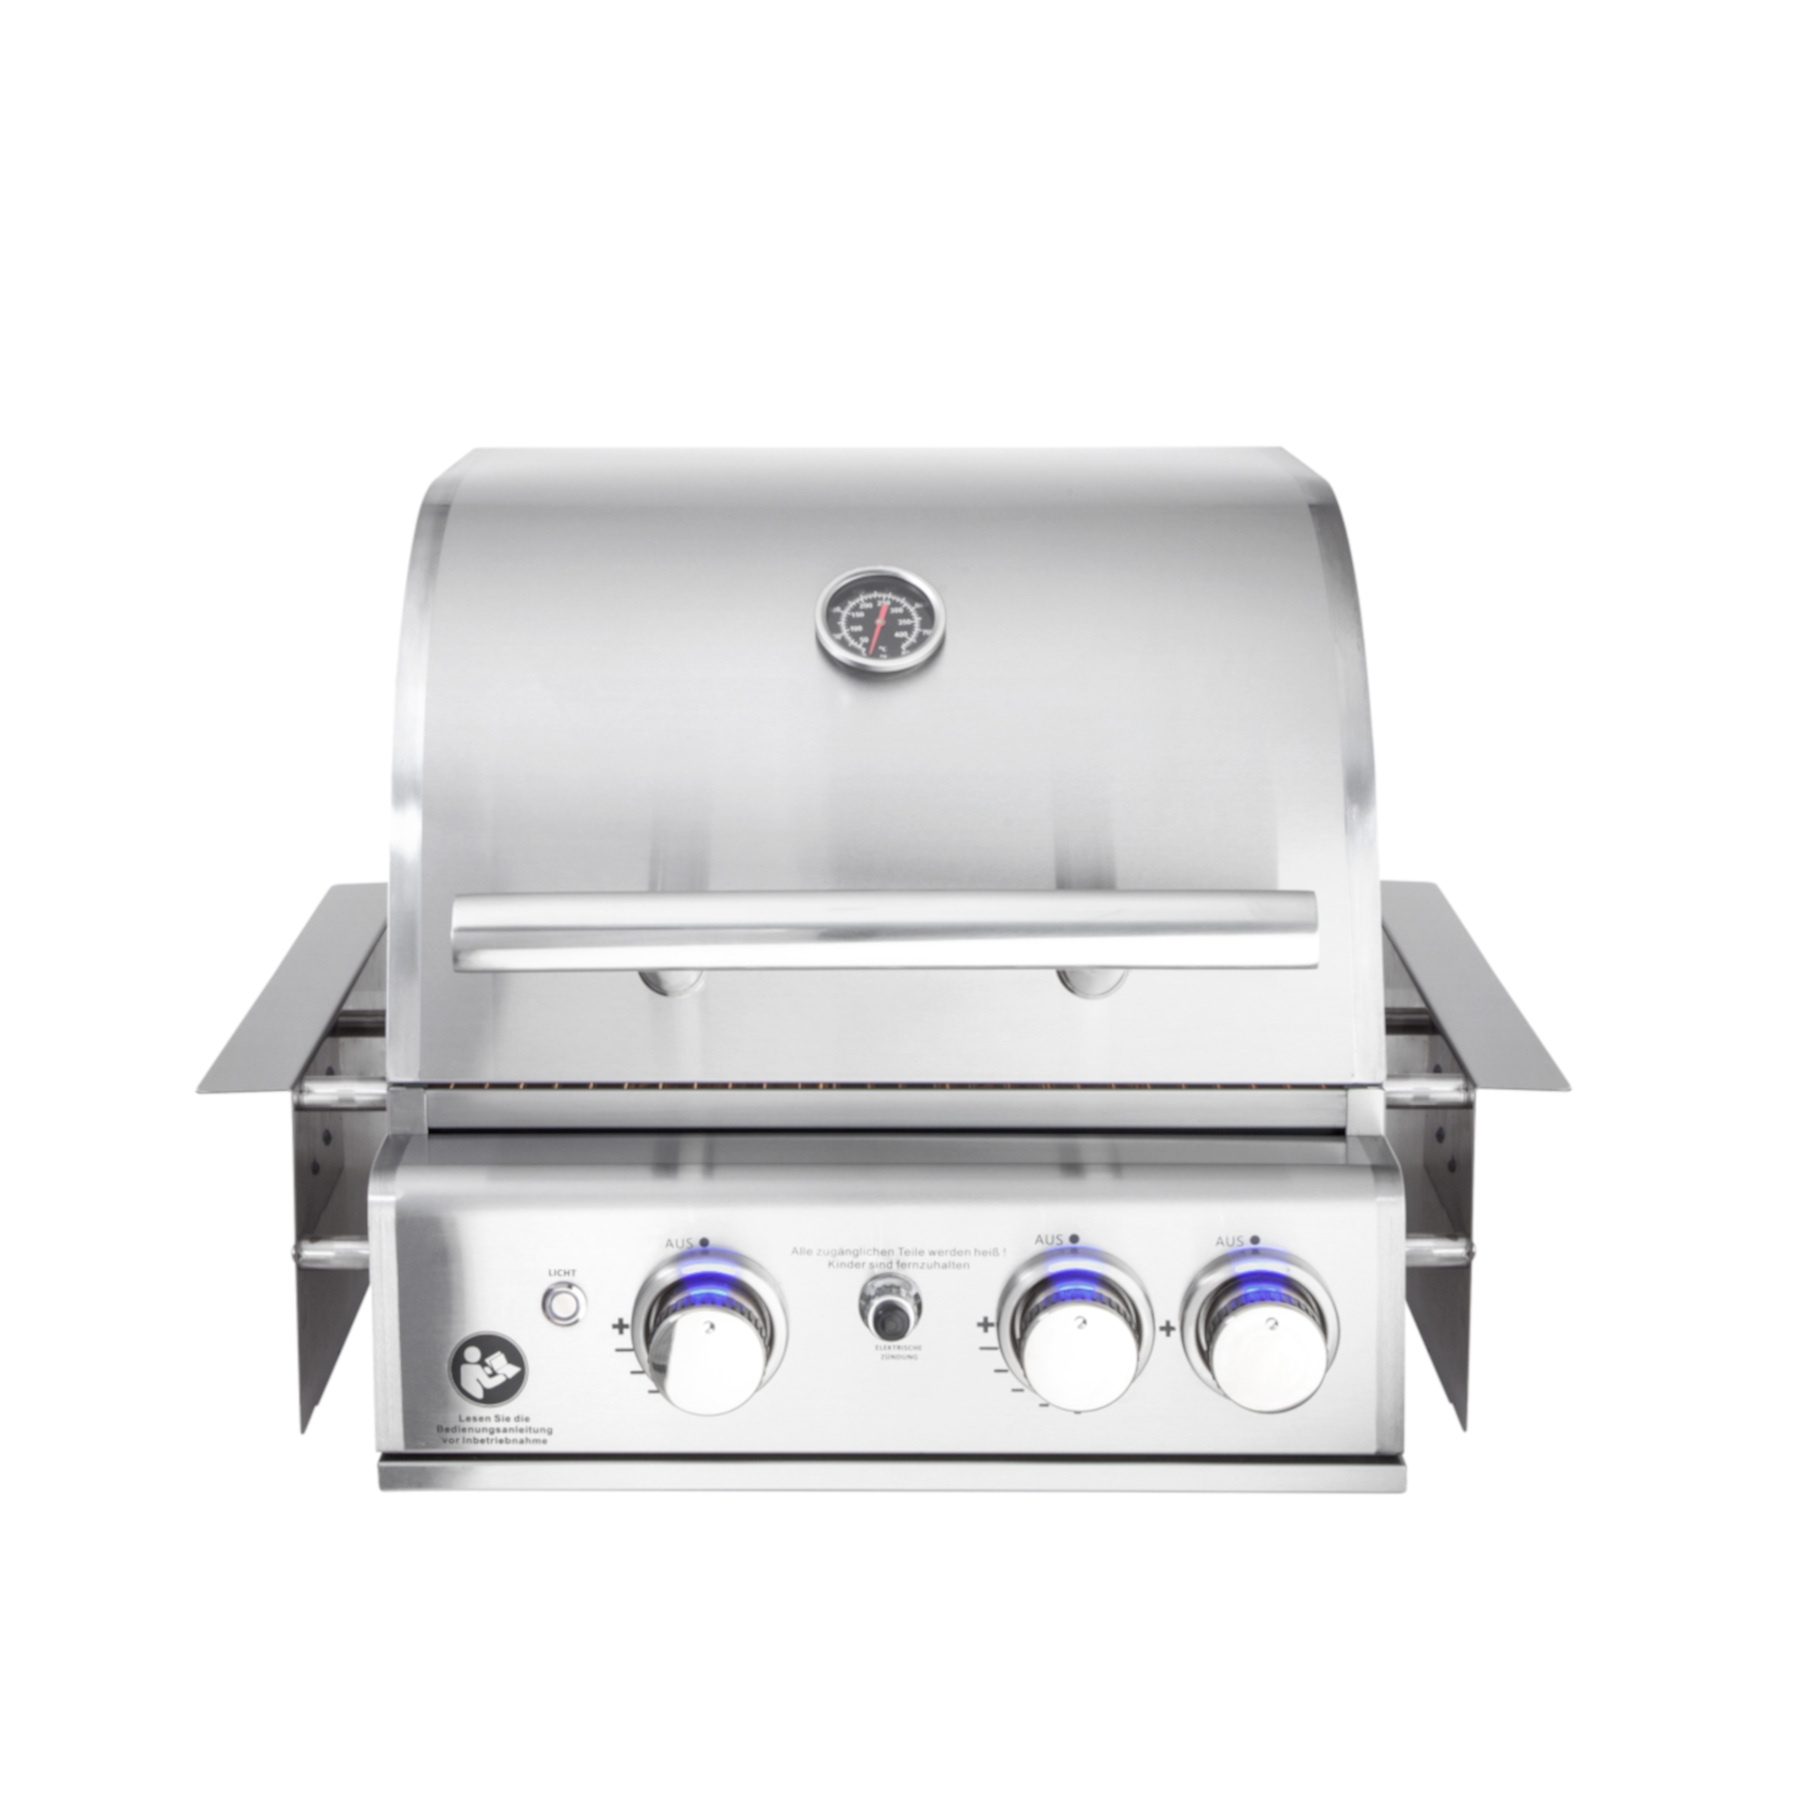 TOP-LINE - ALL'GRILL CHEF "S" - BUILT-IN mit Air System